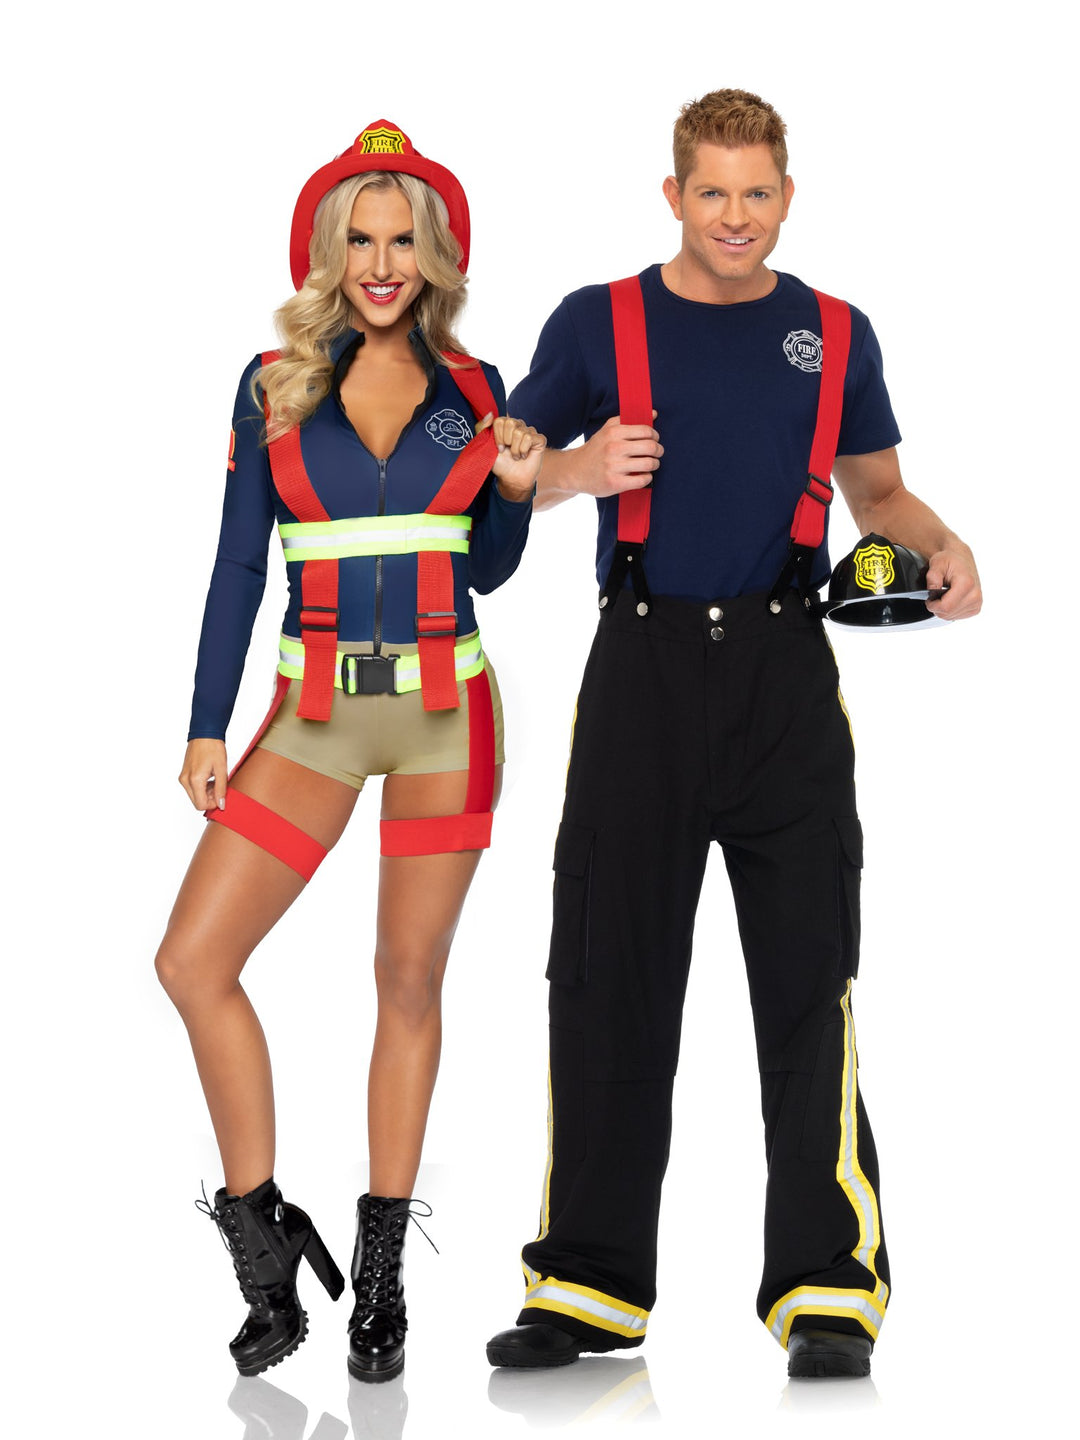 Fire Captain Costume with Suspenders